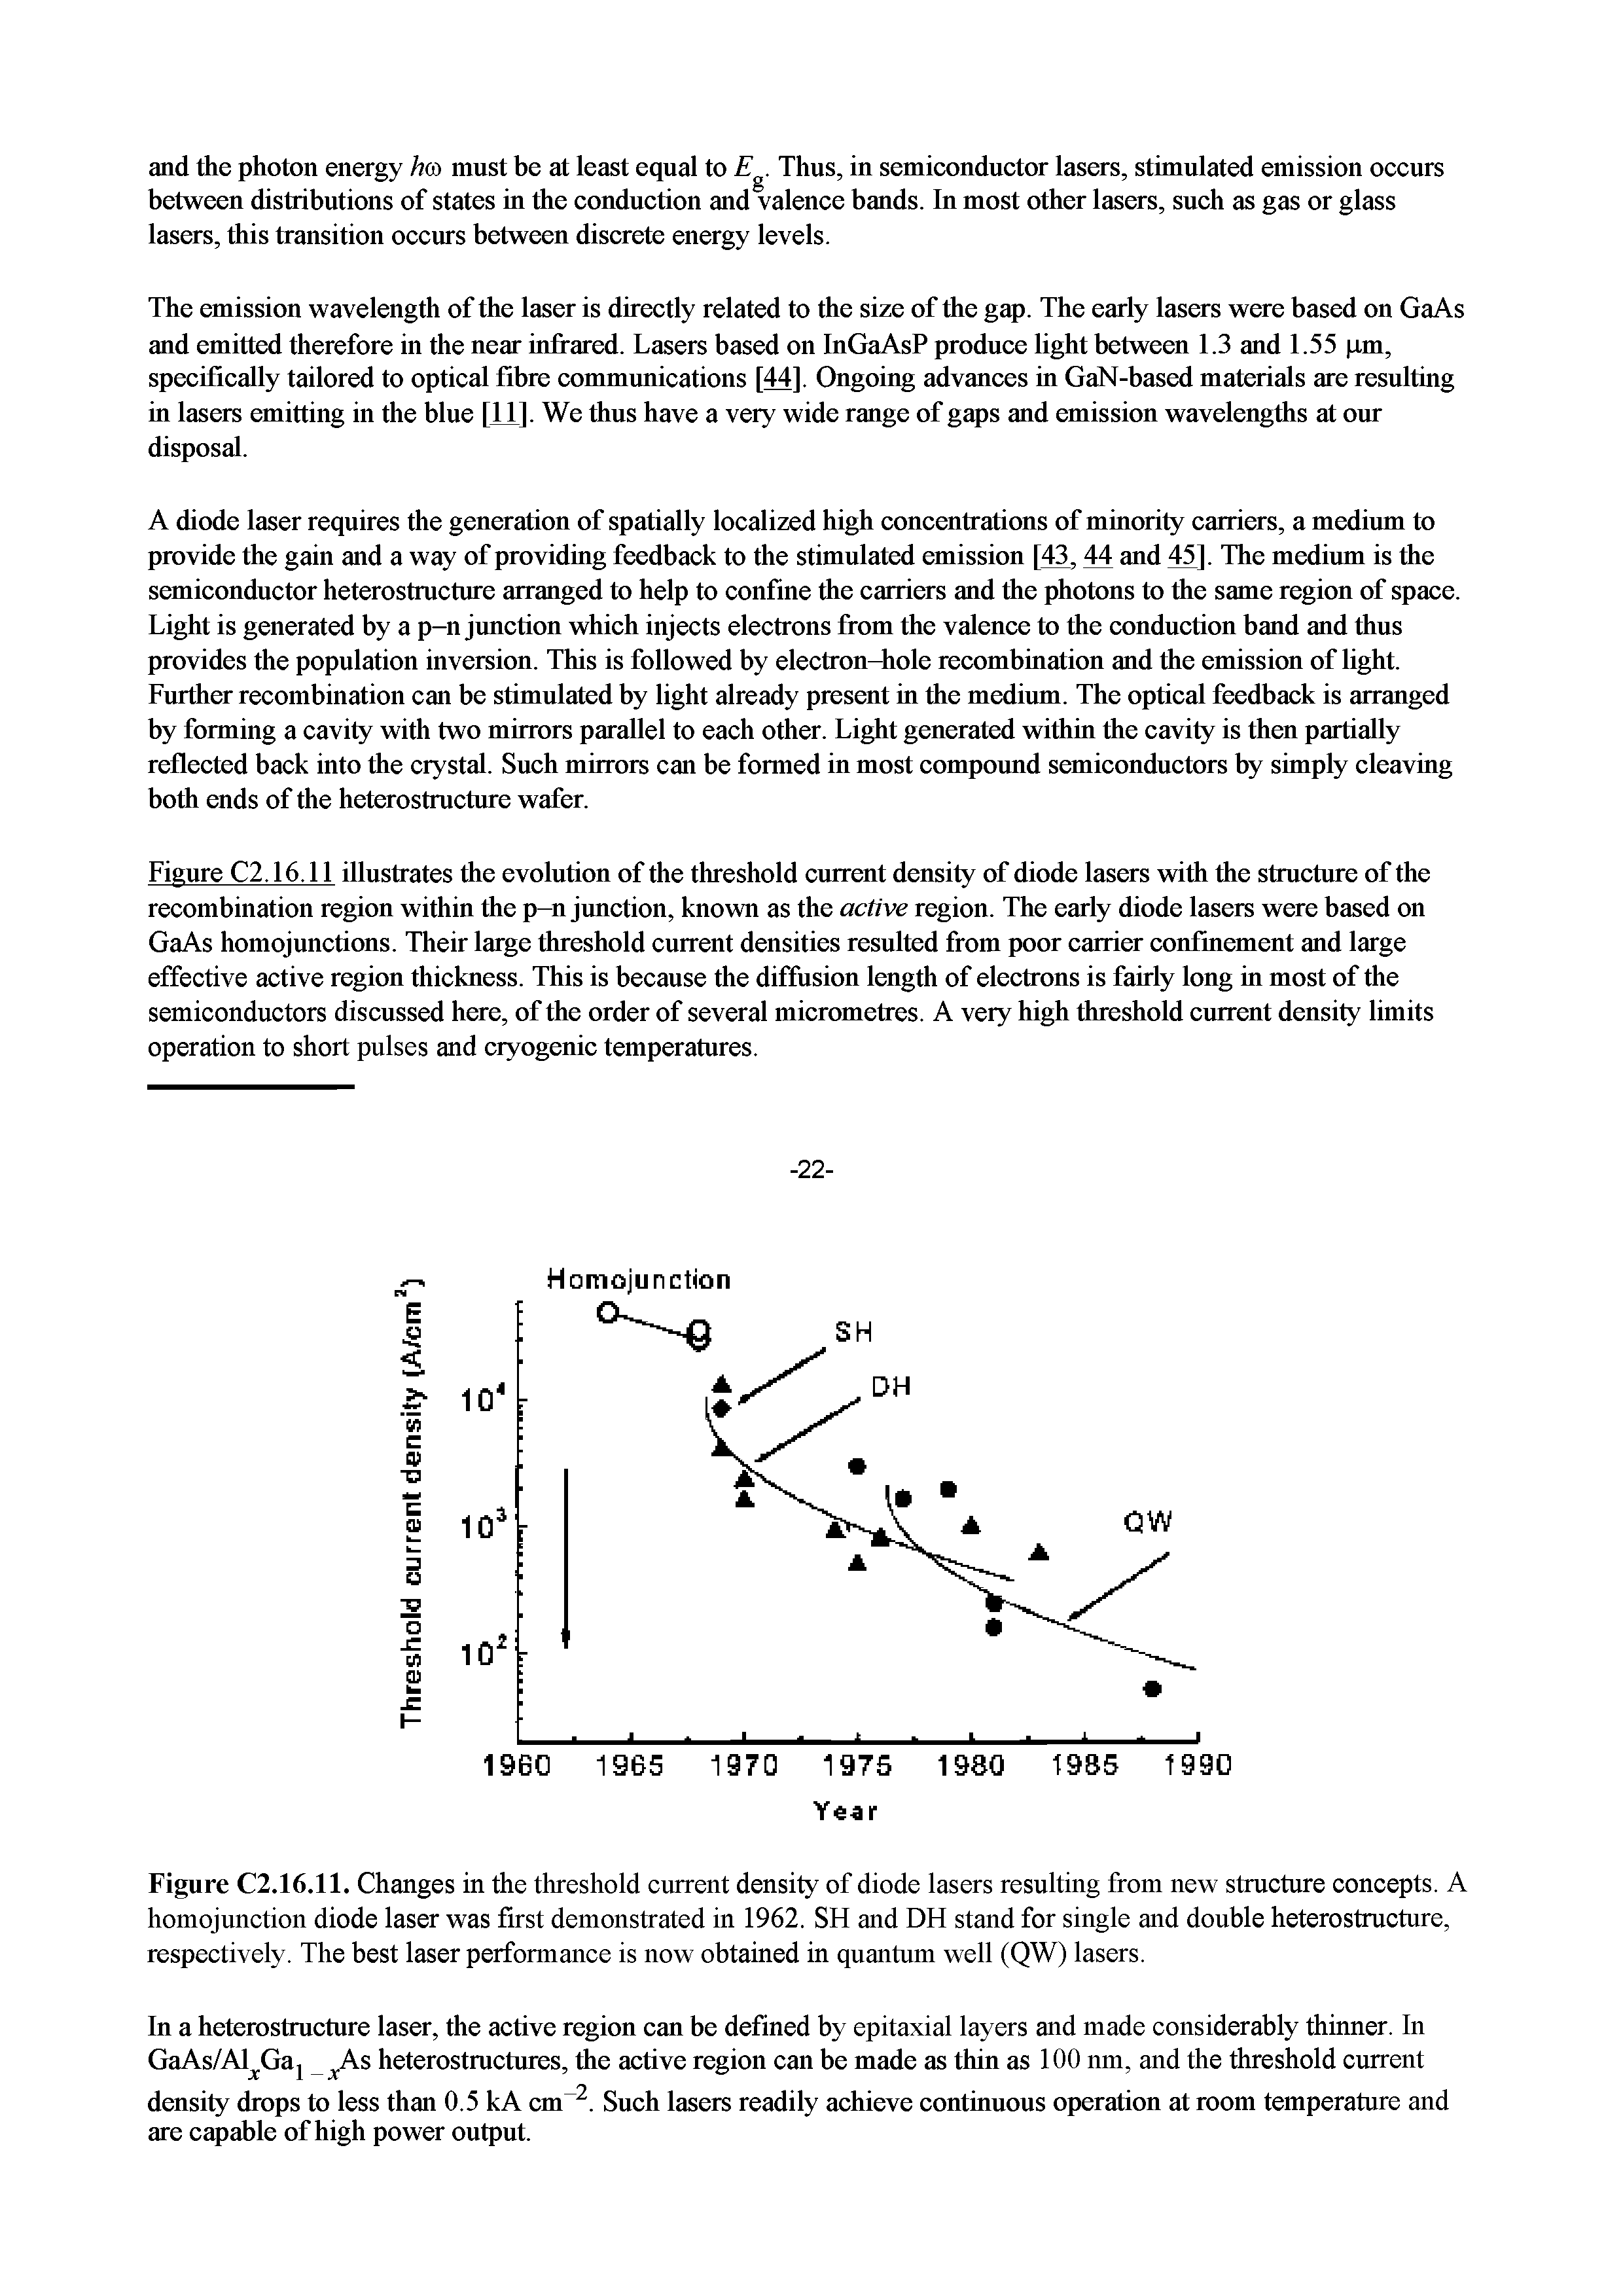 Figure C2. 16.ll illustrates the evolution of the threshold current density of diode lasers with the structure of the recombination region within the p-n jimction, known as the active region. The early diode lasers were based on GaAs homojunctions. Their large threshold current densities resulted from poor carrier confinement and large effective active region thickness. This is because the diffusion length of electrons is fairly long in most of the semiconductors discussed here, of the order of several micrometres. A very high threshold current density limits operation to short pulses and ciyogenic temperatures.